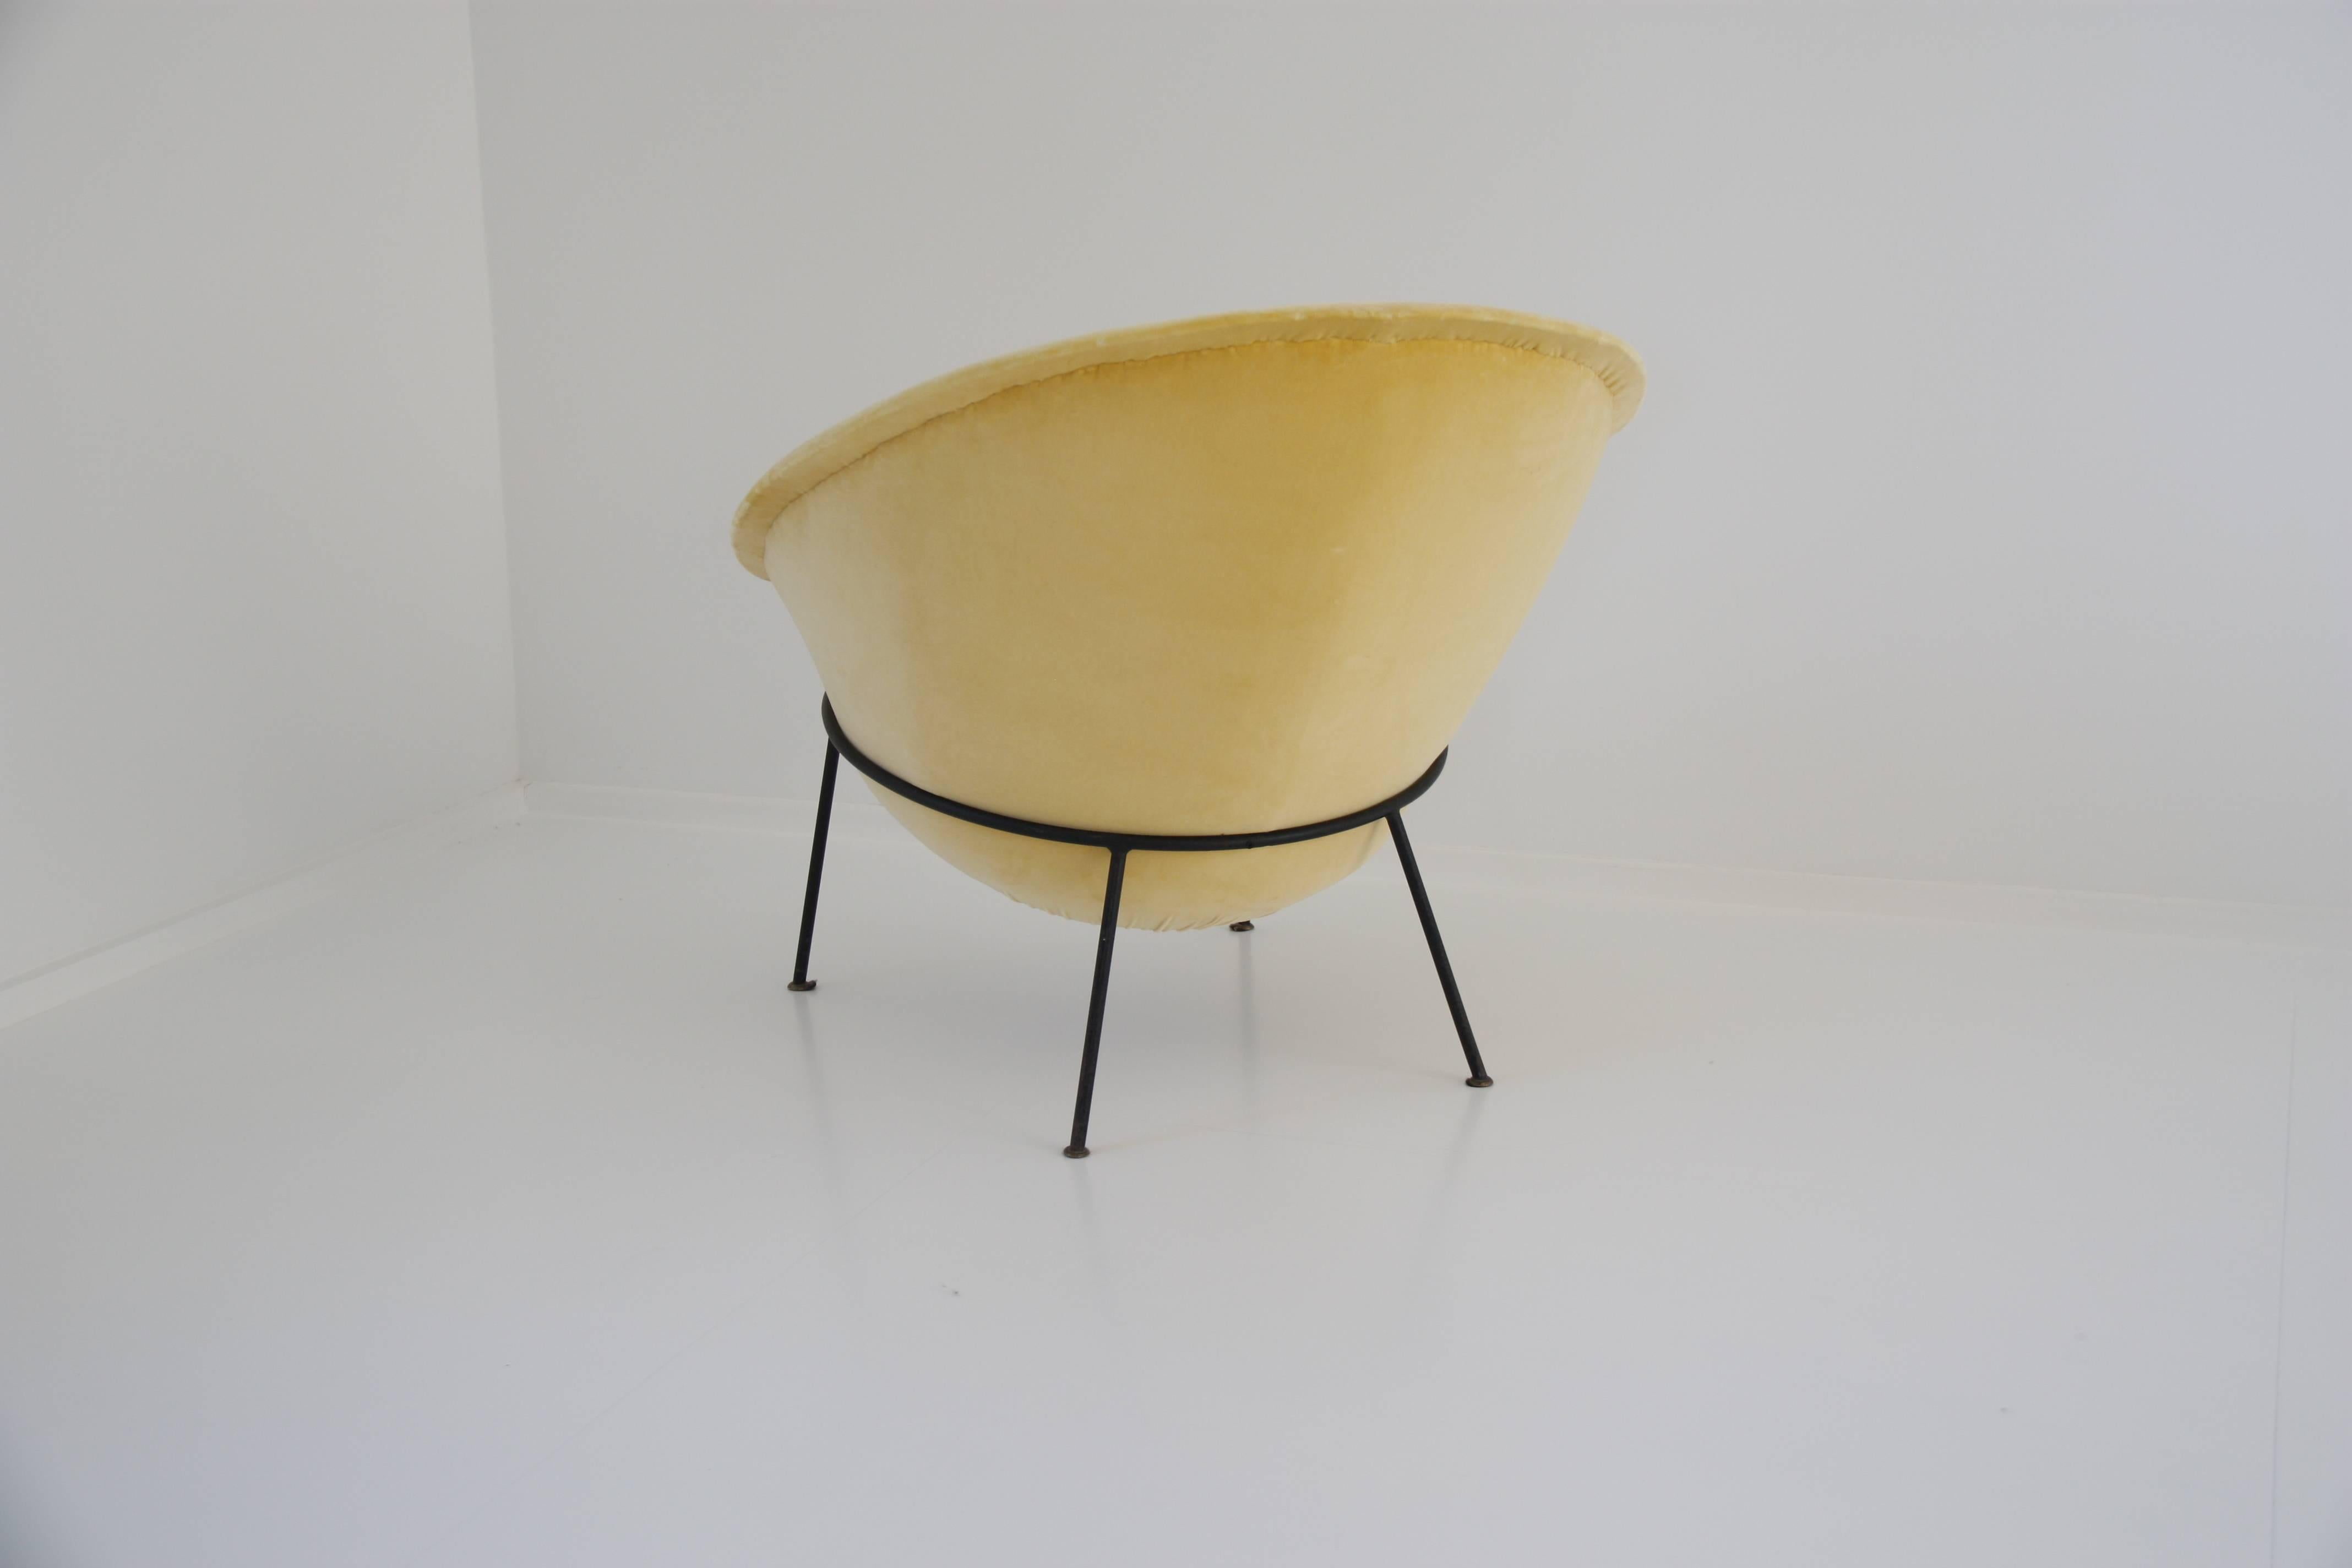 Vintage round armchair with a yellow upholstery velvet and a black metal structure , attributed to Vittorio Vigano, Italy, circa 1950
Measures: High 75 cm, large 80 cm, deep 90 cm
high 29.52